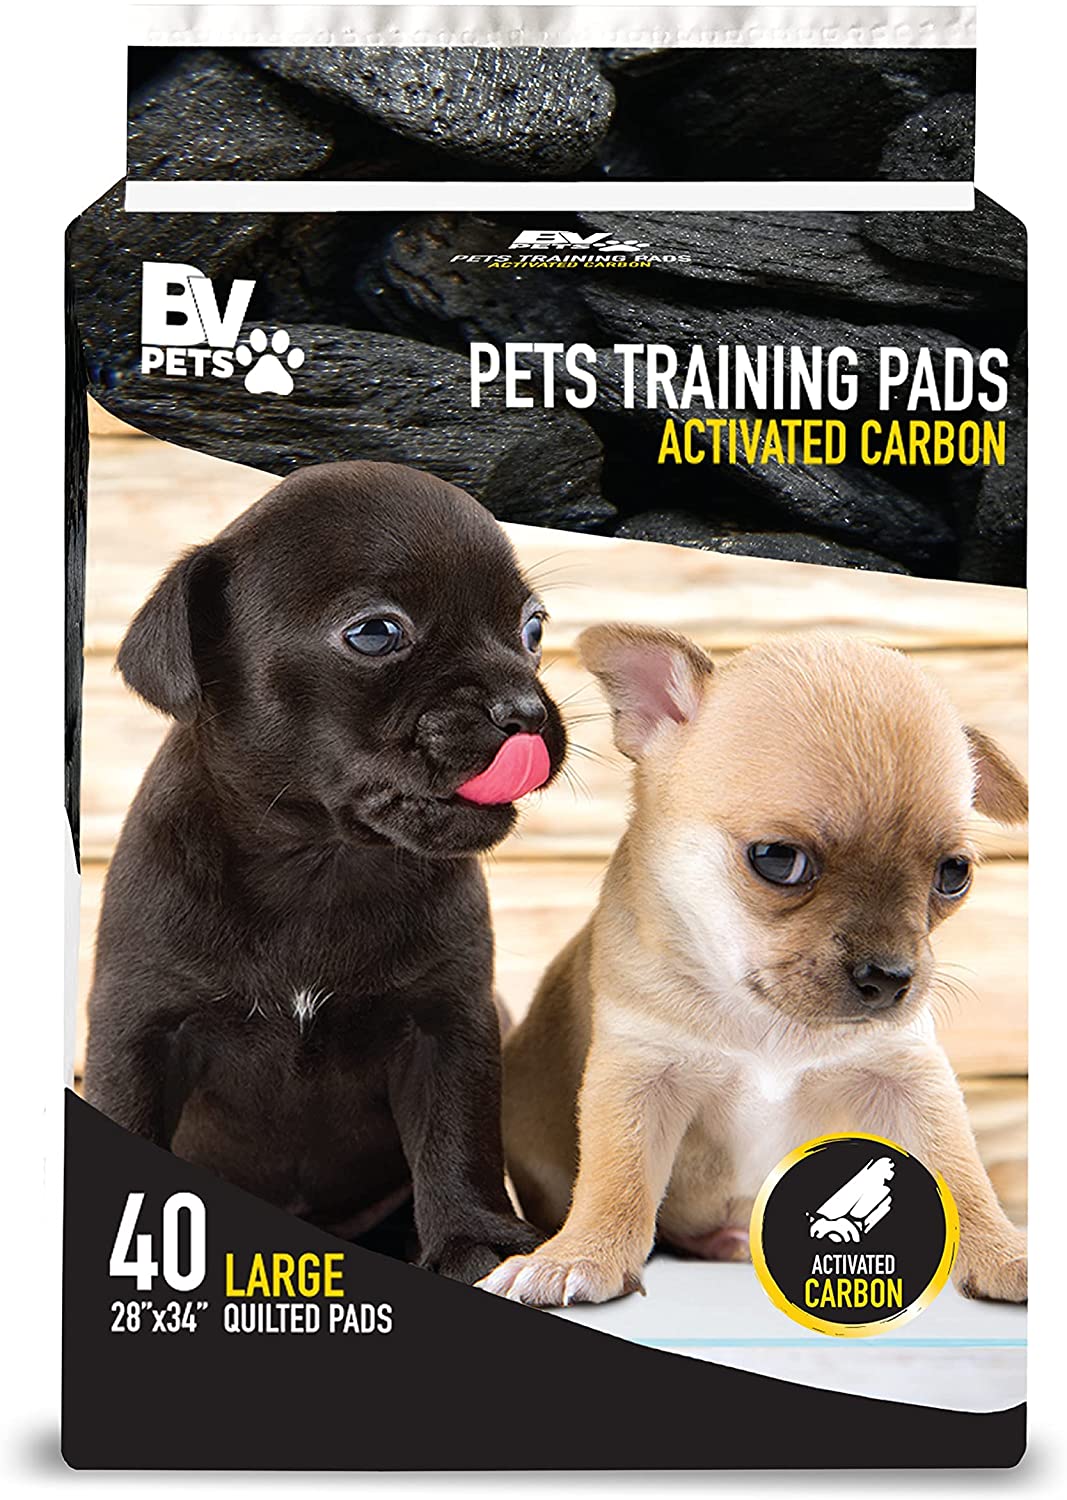 BV Pet Potty Training Pads Pee Pads for Dog and Puppy, 28" x 34", Extra Large